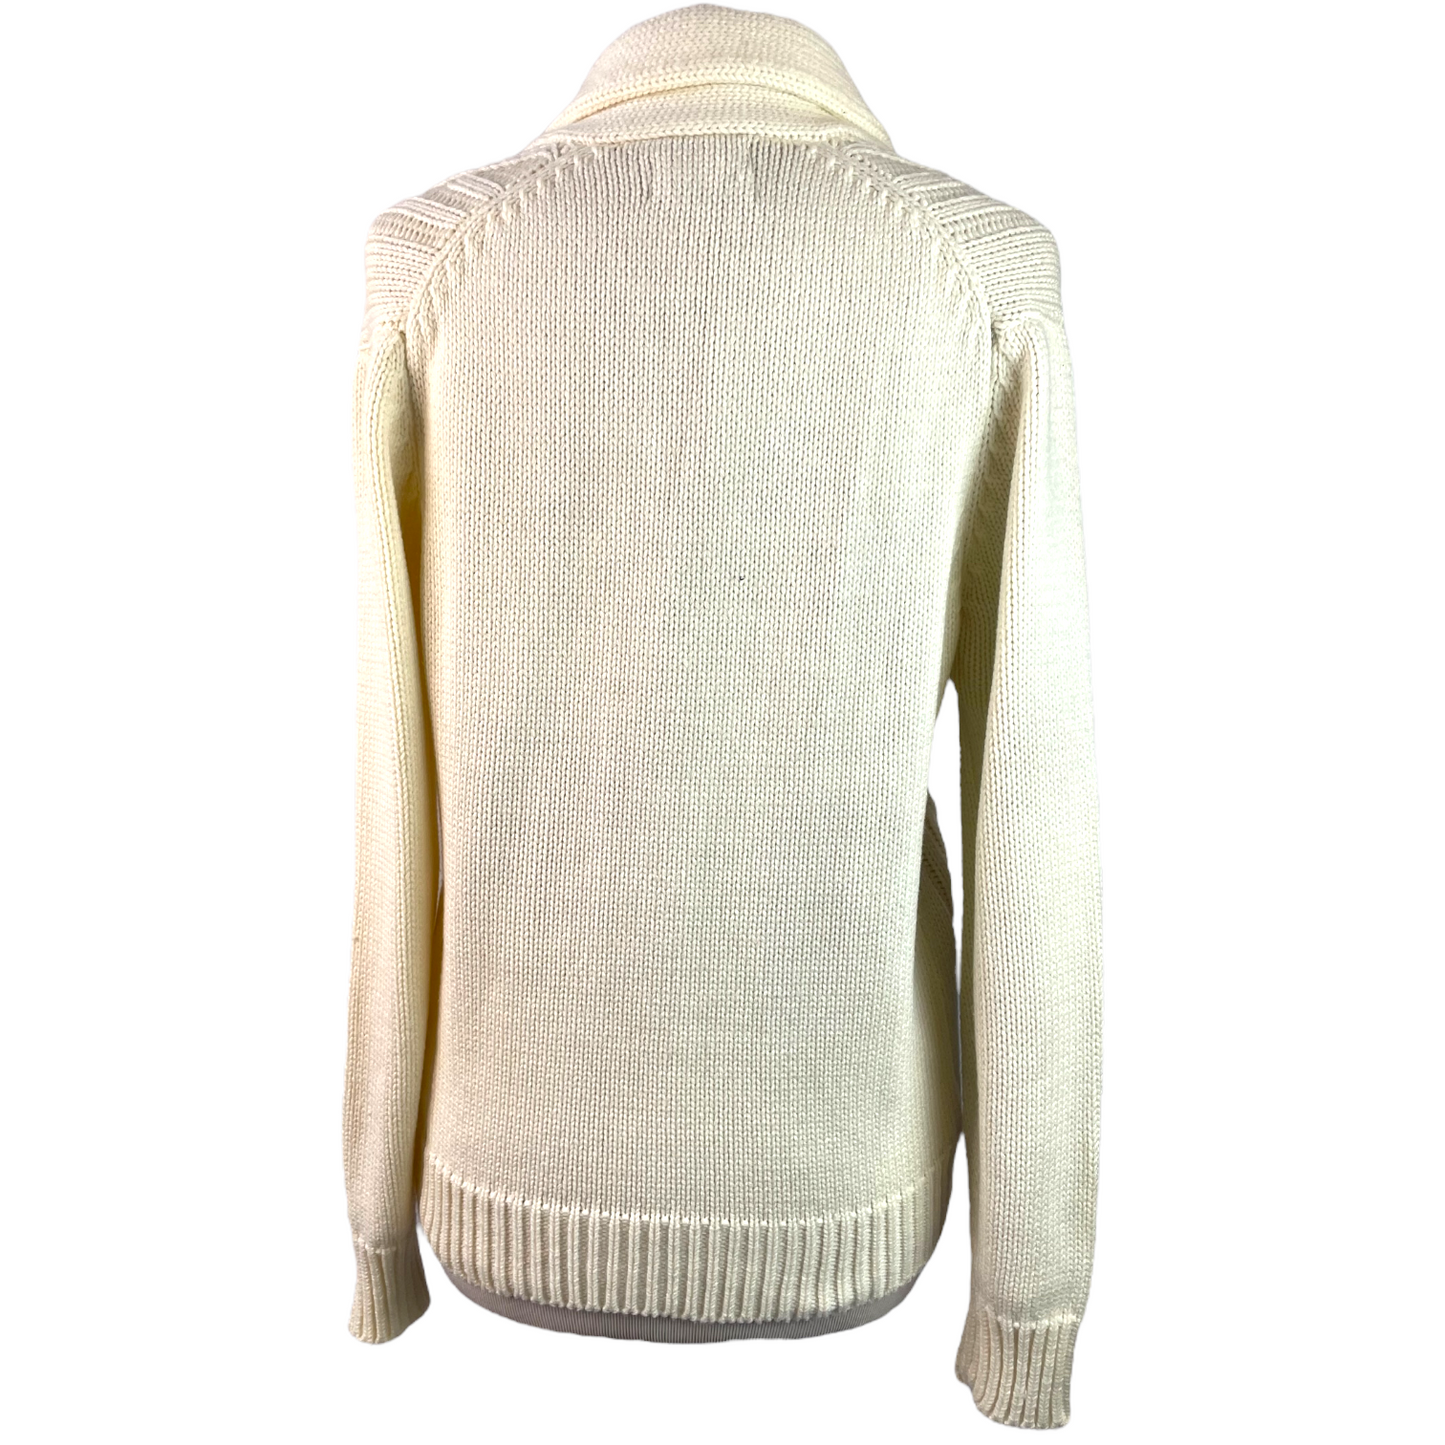 Vintage White Cable Knit Cardigan